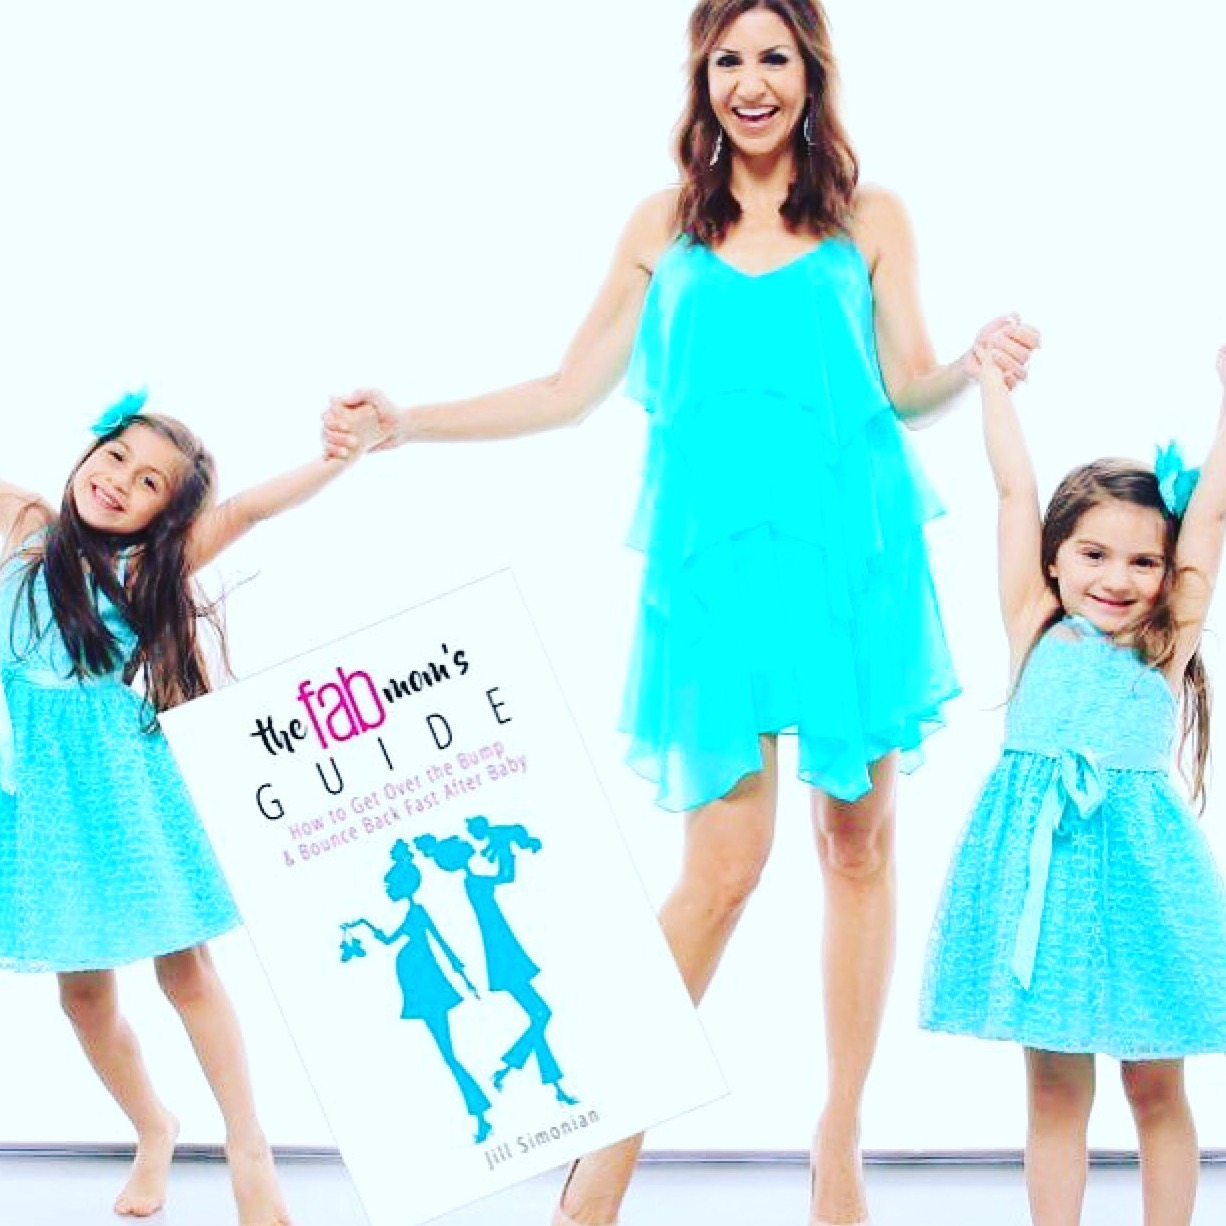 Jill Simonian, author of The FAB Mom's Guide book, holds hands with her daughters.